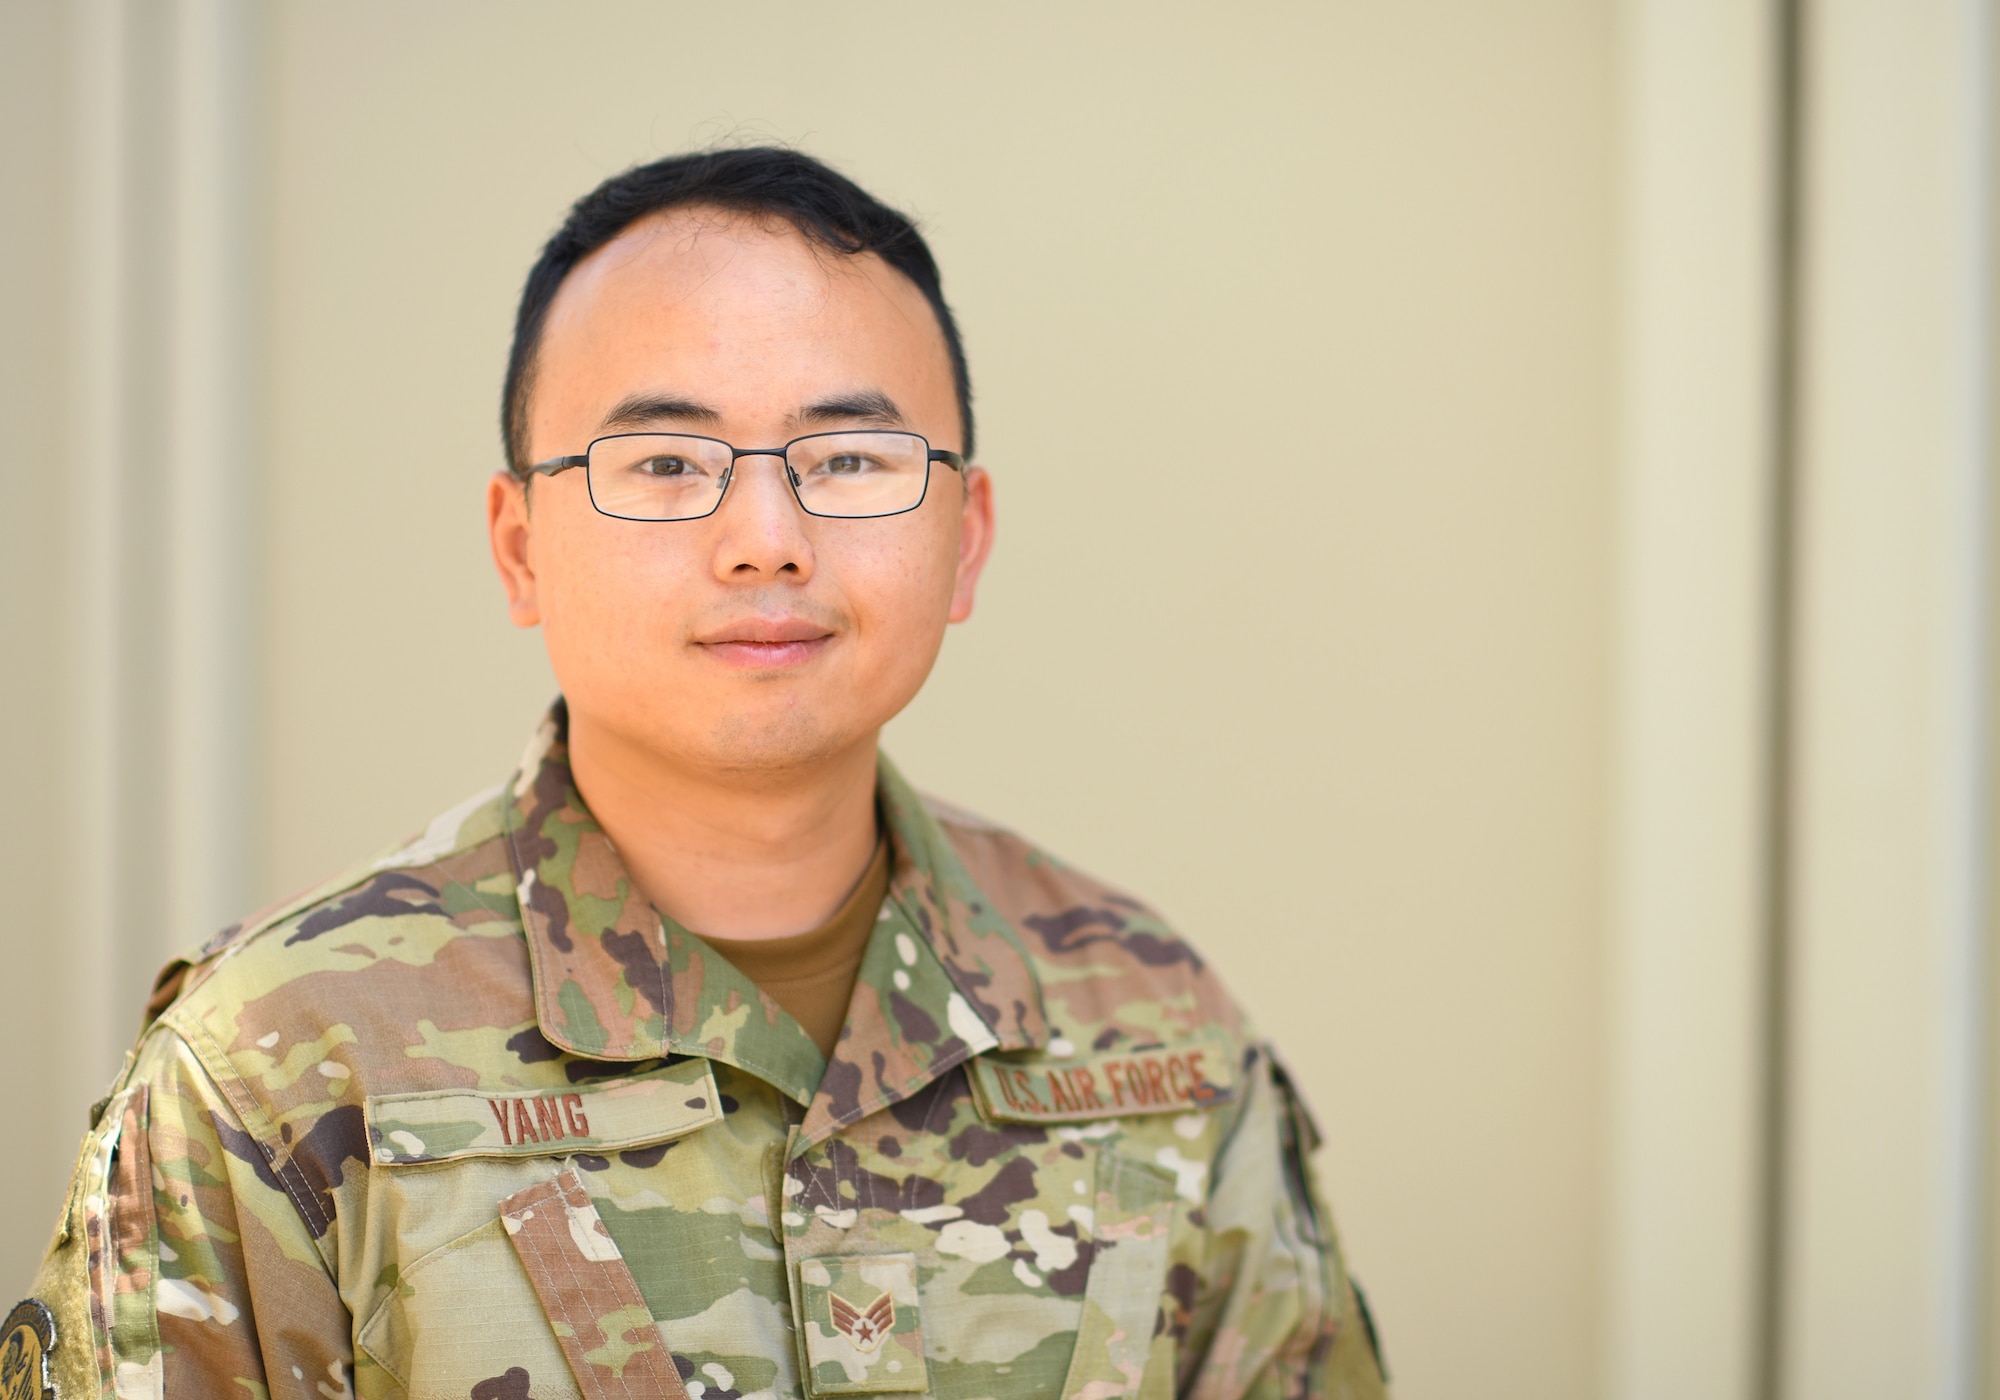 U.S. Air Force Senior Airman Blia Yang, 726th Expeditionary Air Base Squadron contracting officer, poses for a photo at Camp Lemonnier, Djibouti, Nov. 15, 2019. Last fiscal year, the 726th EABS Finance and Contracting Airmen executed more than $22 million, sustaining and building missions at three locations across East Africa. (U.S. Air Force photo by Staff Sgt. Alex Fox Echols III)